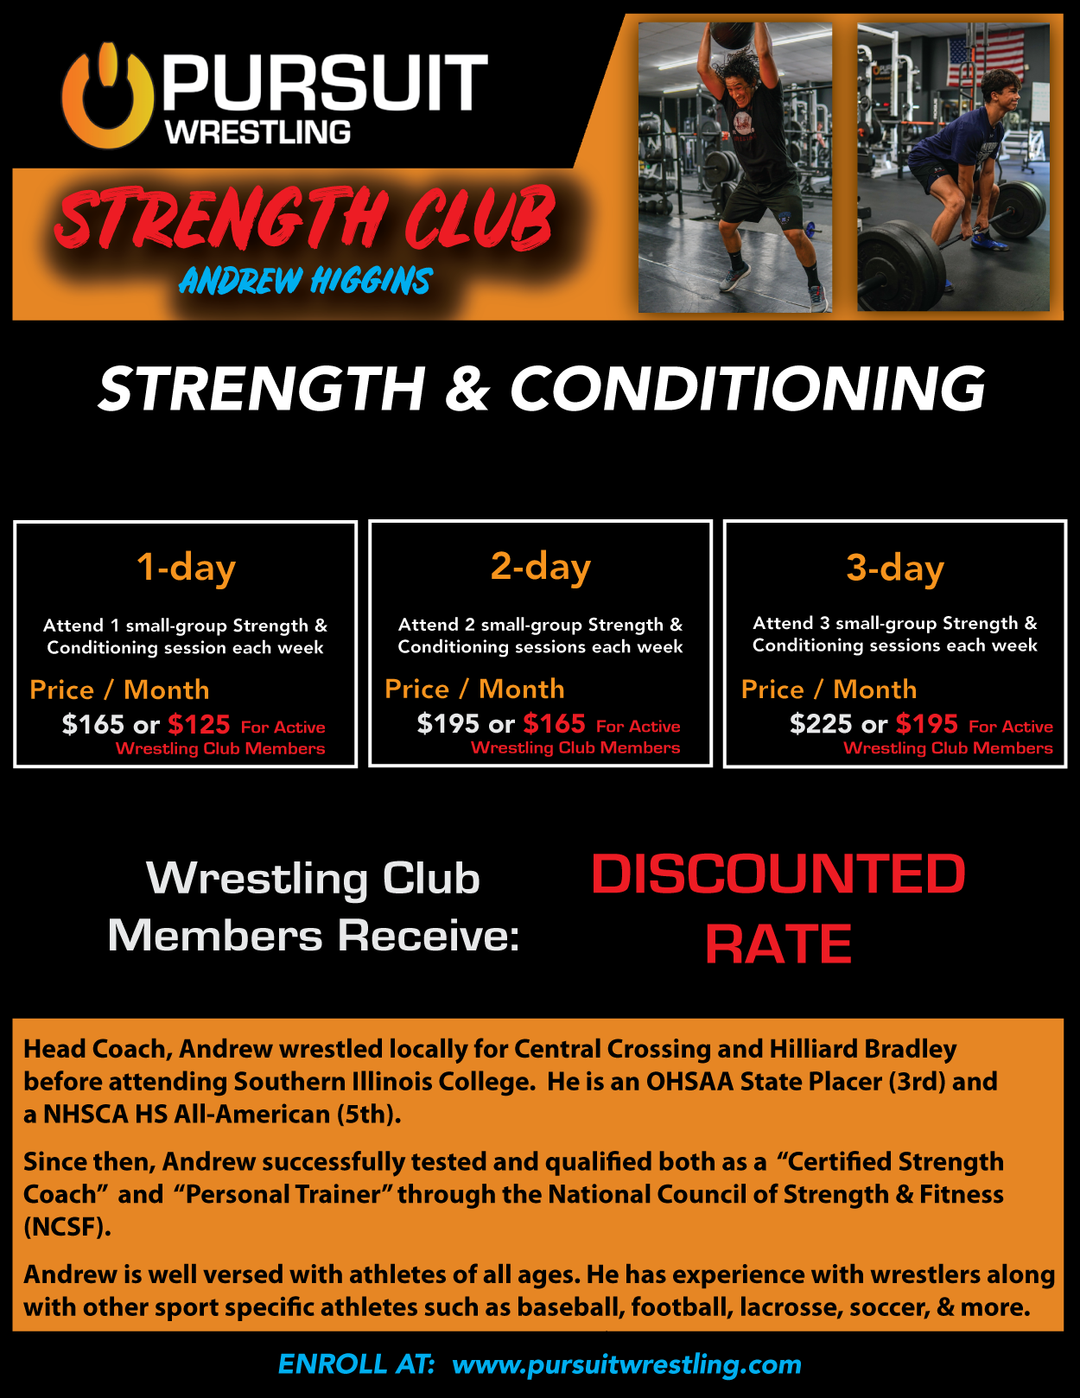 - Strength Club with Andrew